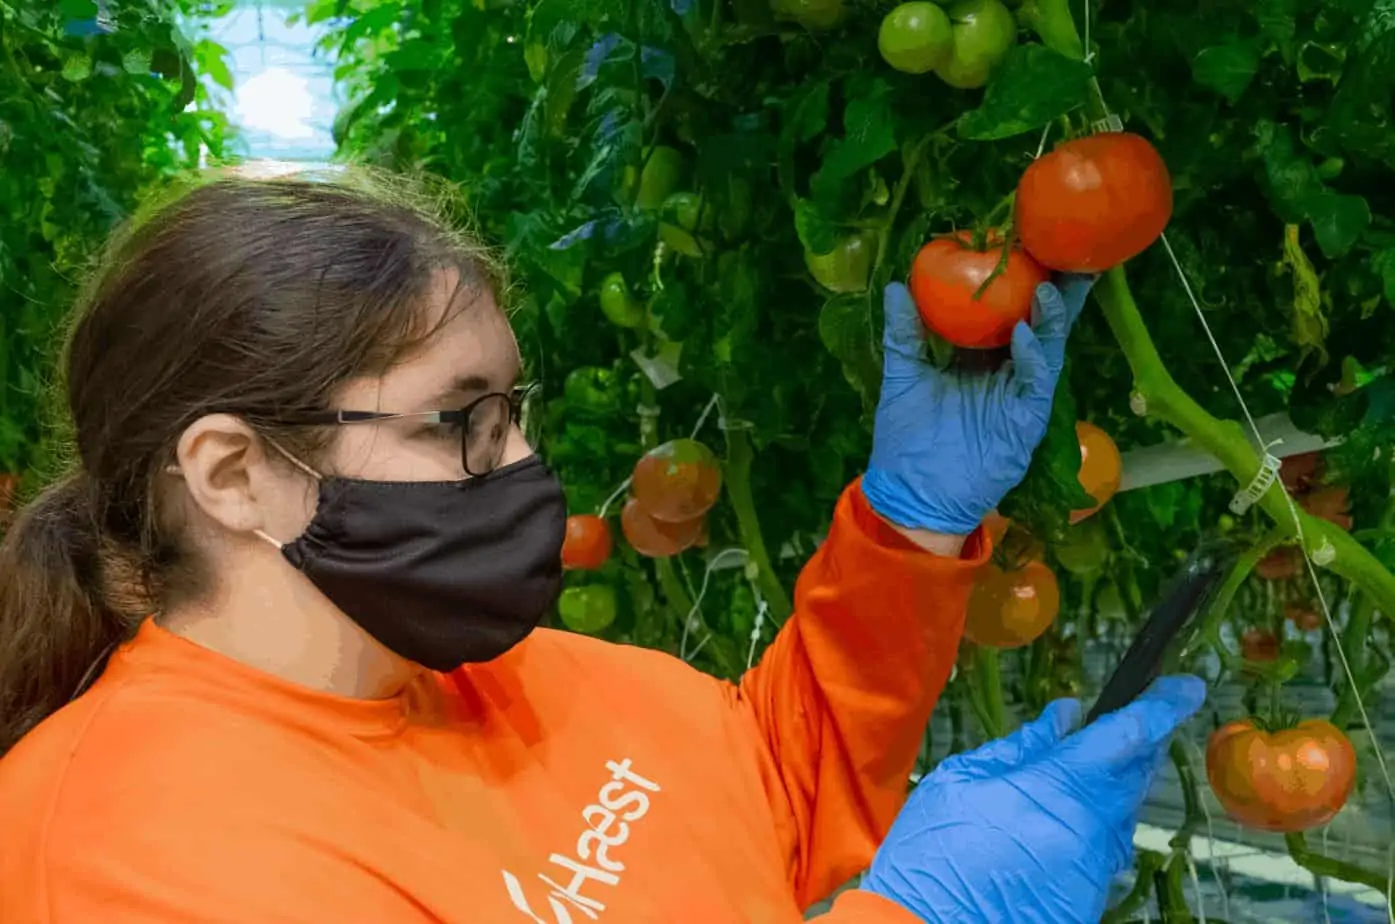 A woman inspecting beefsteak tomatoes grown in AppHarvest's indoor farms in Kentucky